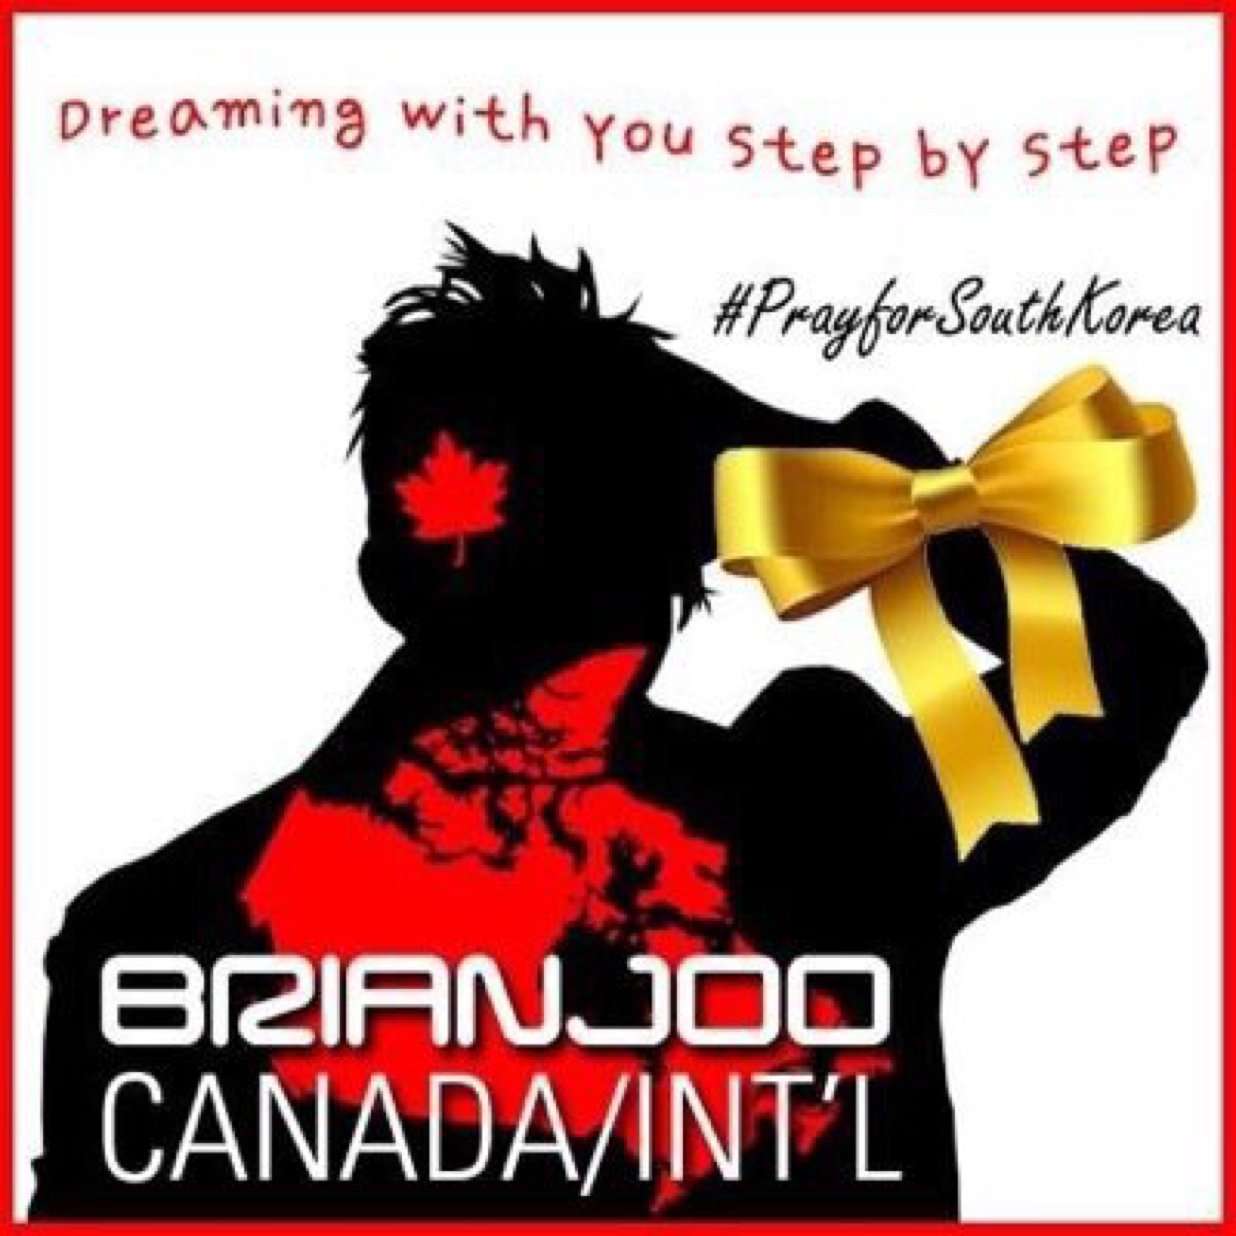 OFFICIAL Brian Joo Canada/International fanbase! Recognized by @thebrianjoo.♥ @3rdWaveMusic Digital Rep. I'm Lisa from Canada.